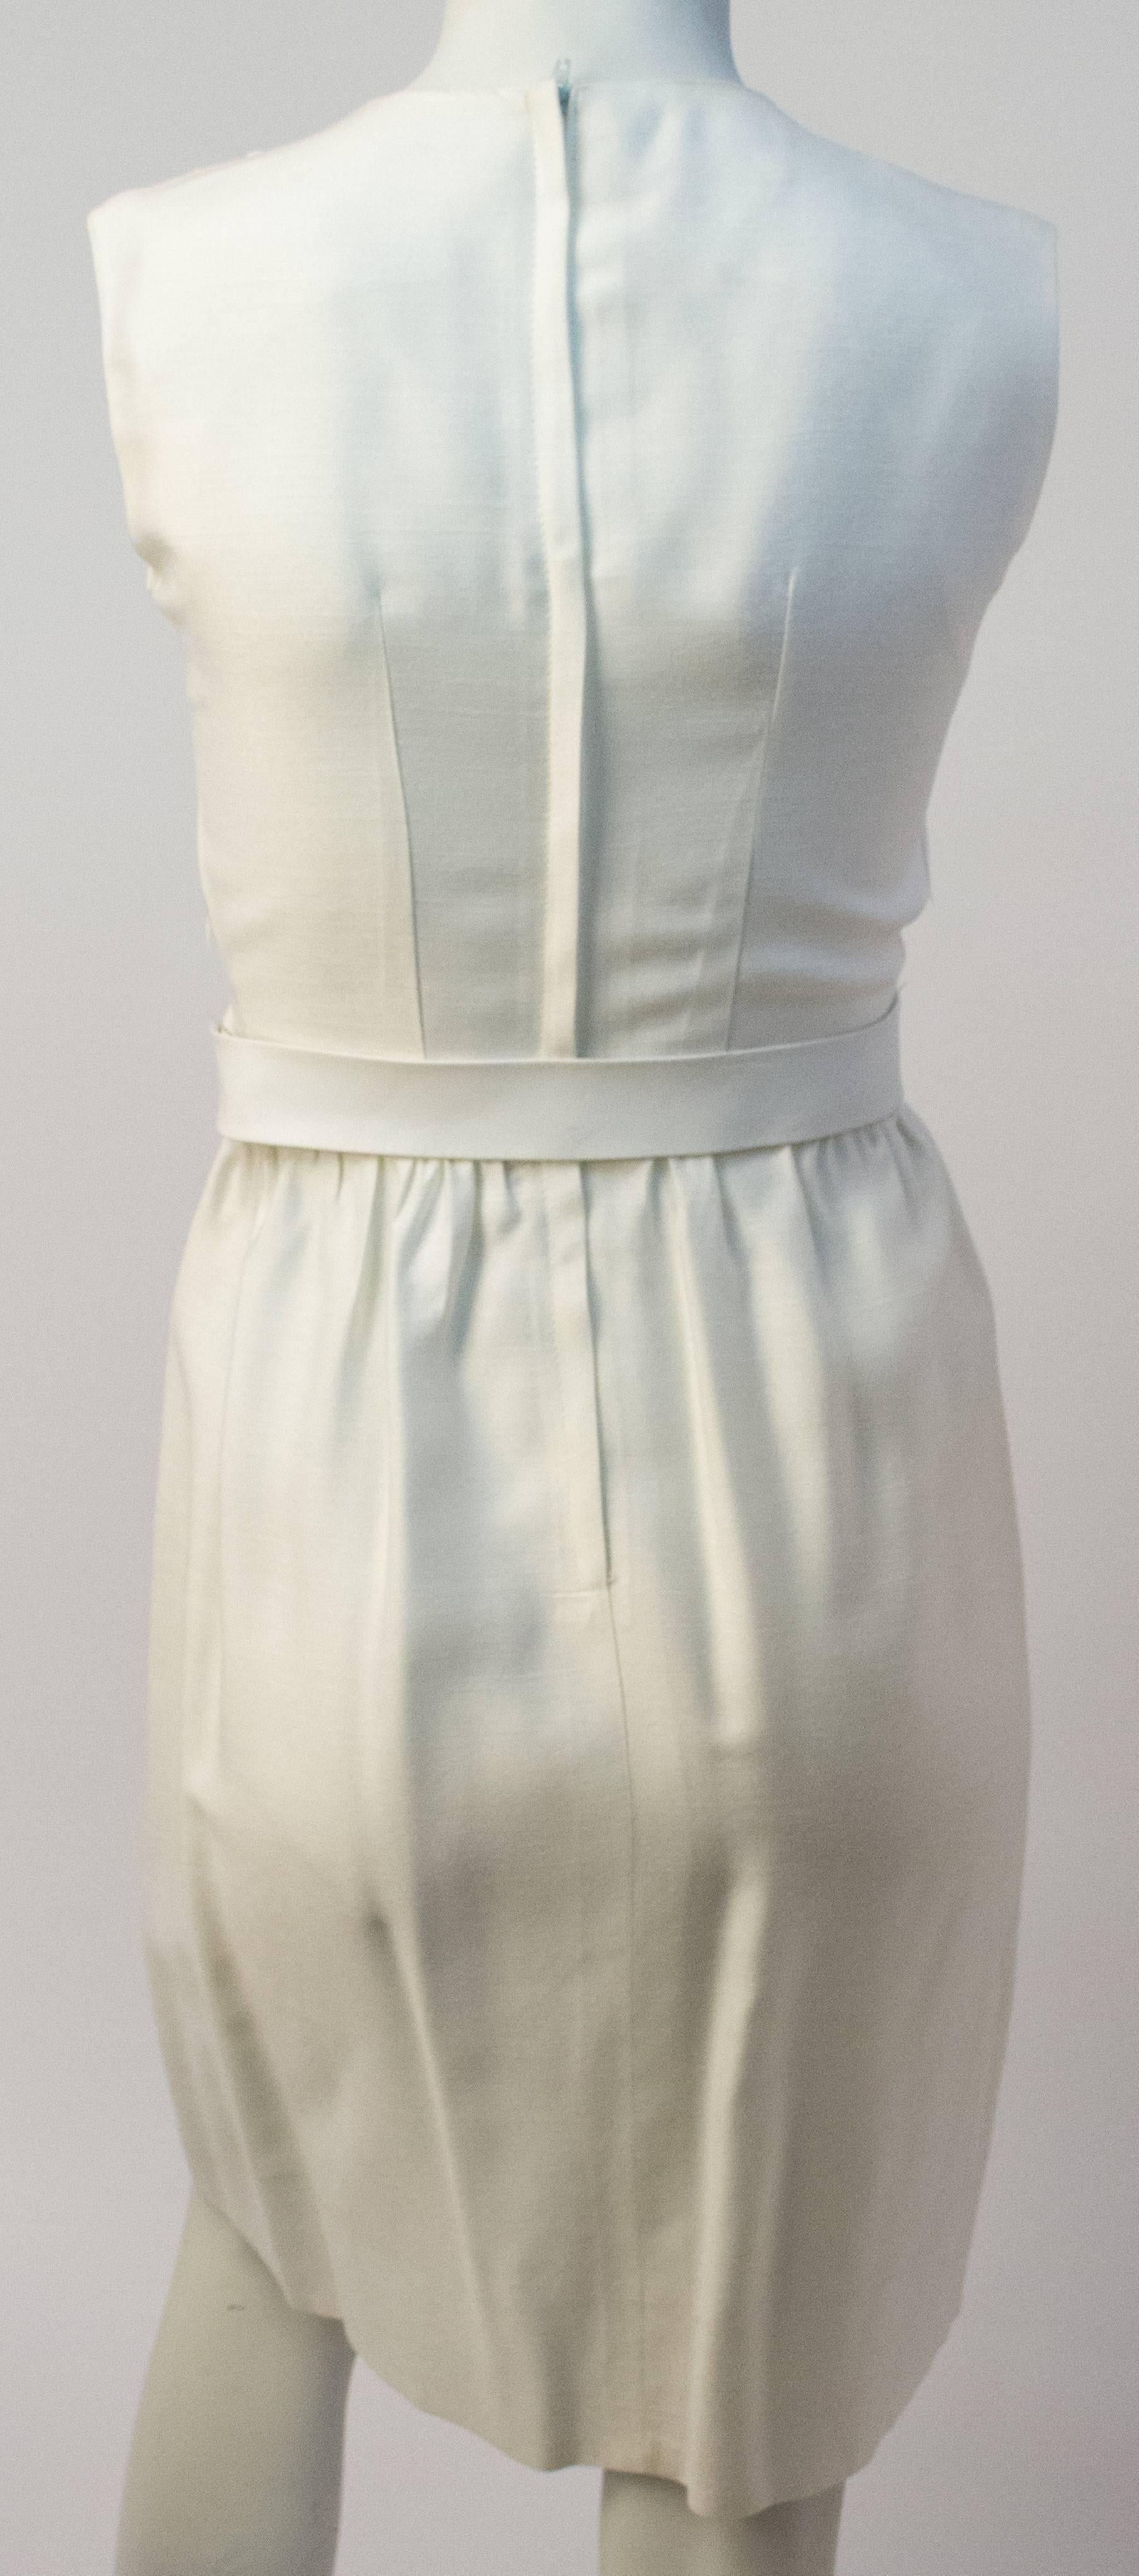 50s White Sheath Dress with original white belt. Princess seaming. Slightly gathered at waist. Lightweight fabric. 

The measurements are as follows;

Bust: 34 inches
Waist: 25 inches
Hip: up to 38 inches
Length: 37 1/2 inches

It is about a US size